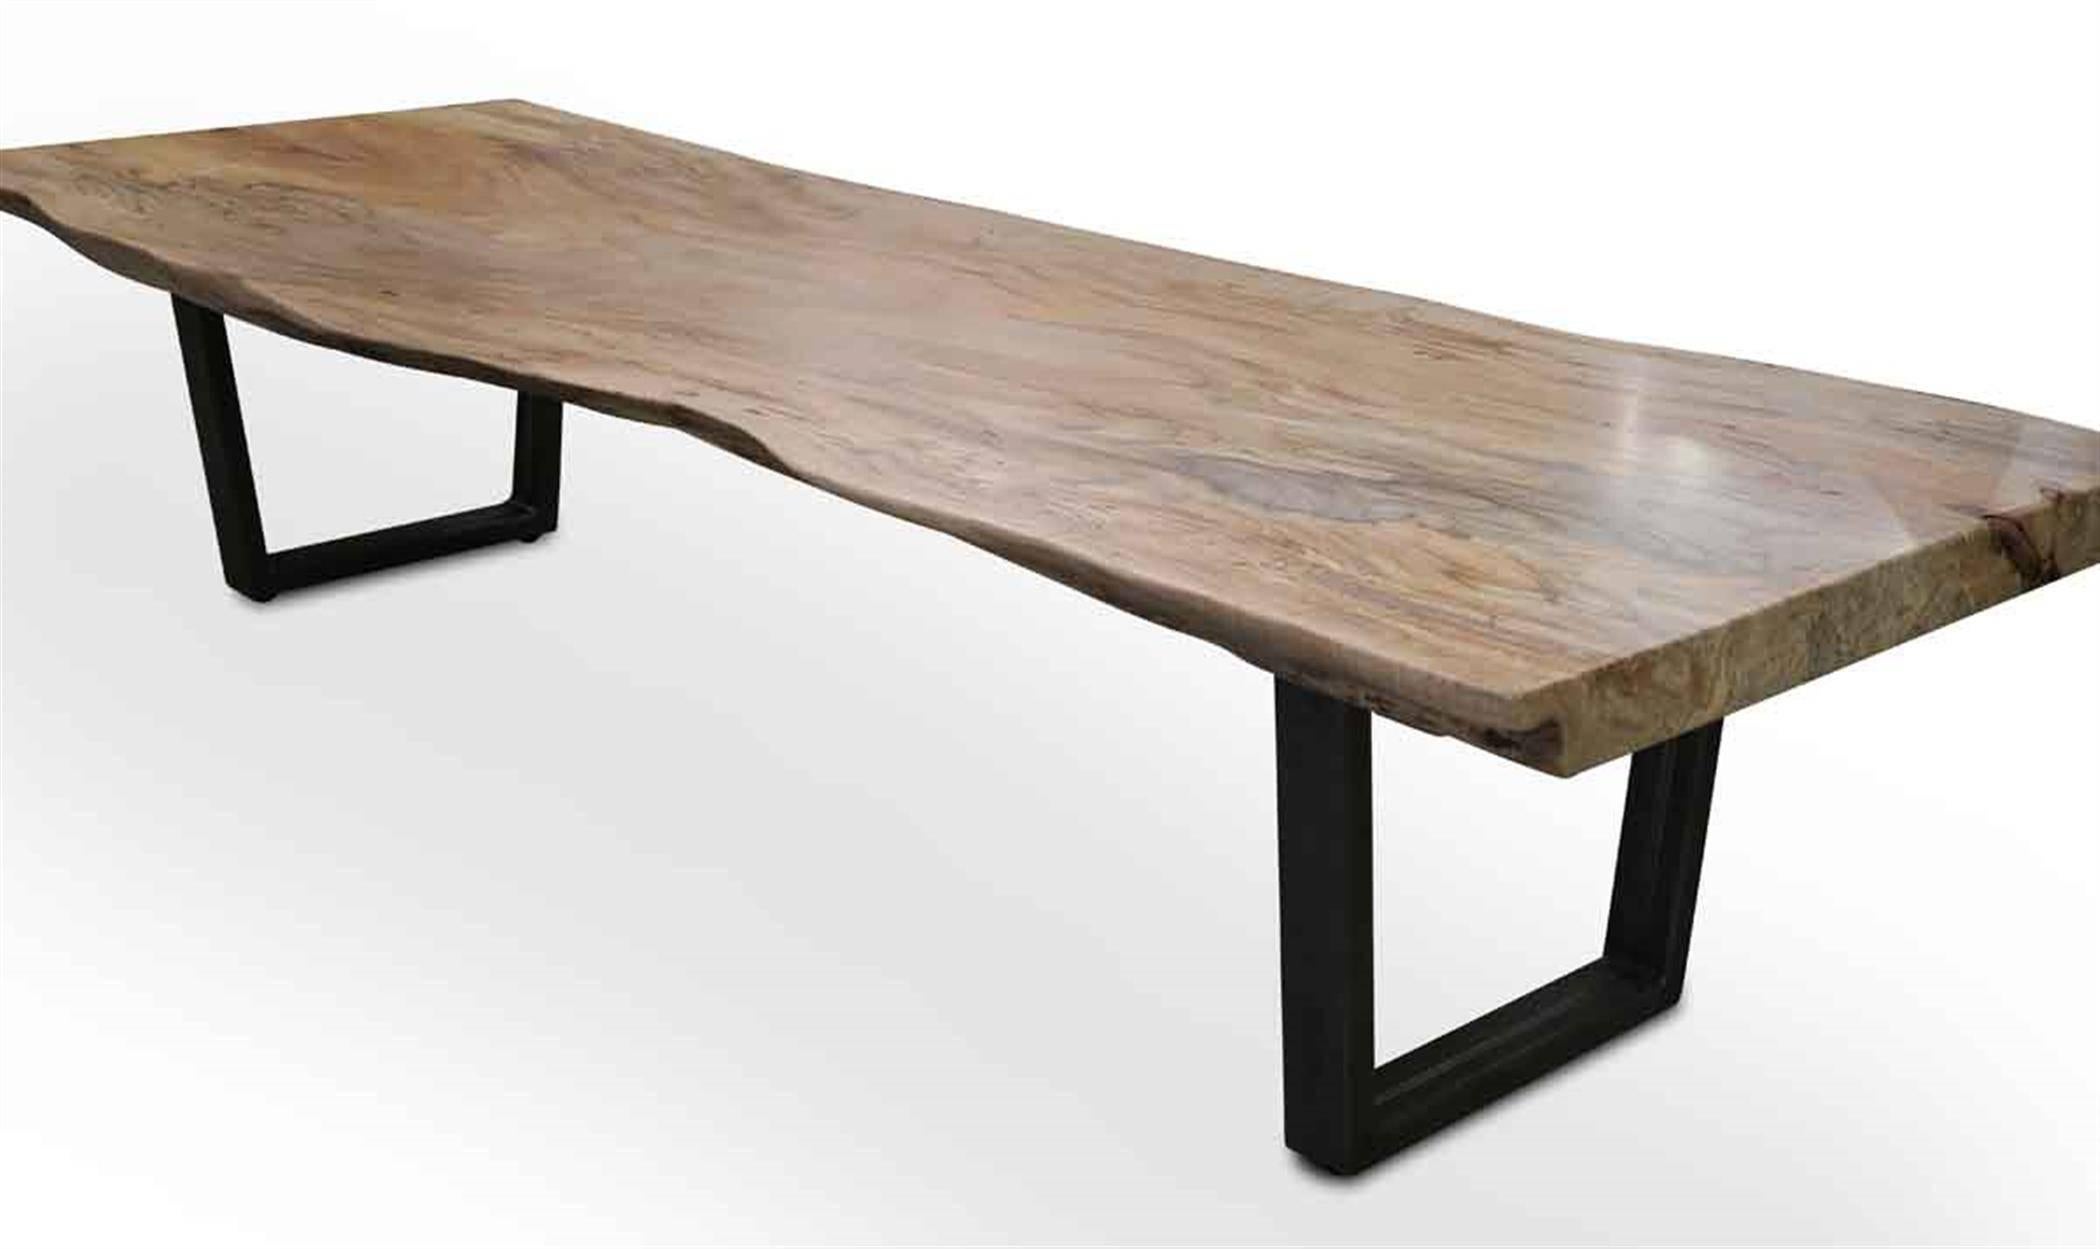 American Live Edge Spalted Maple Coffee Mid-Century Modern Style Table with U Framed Legs